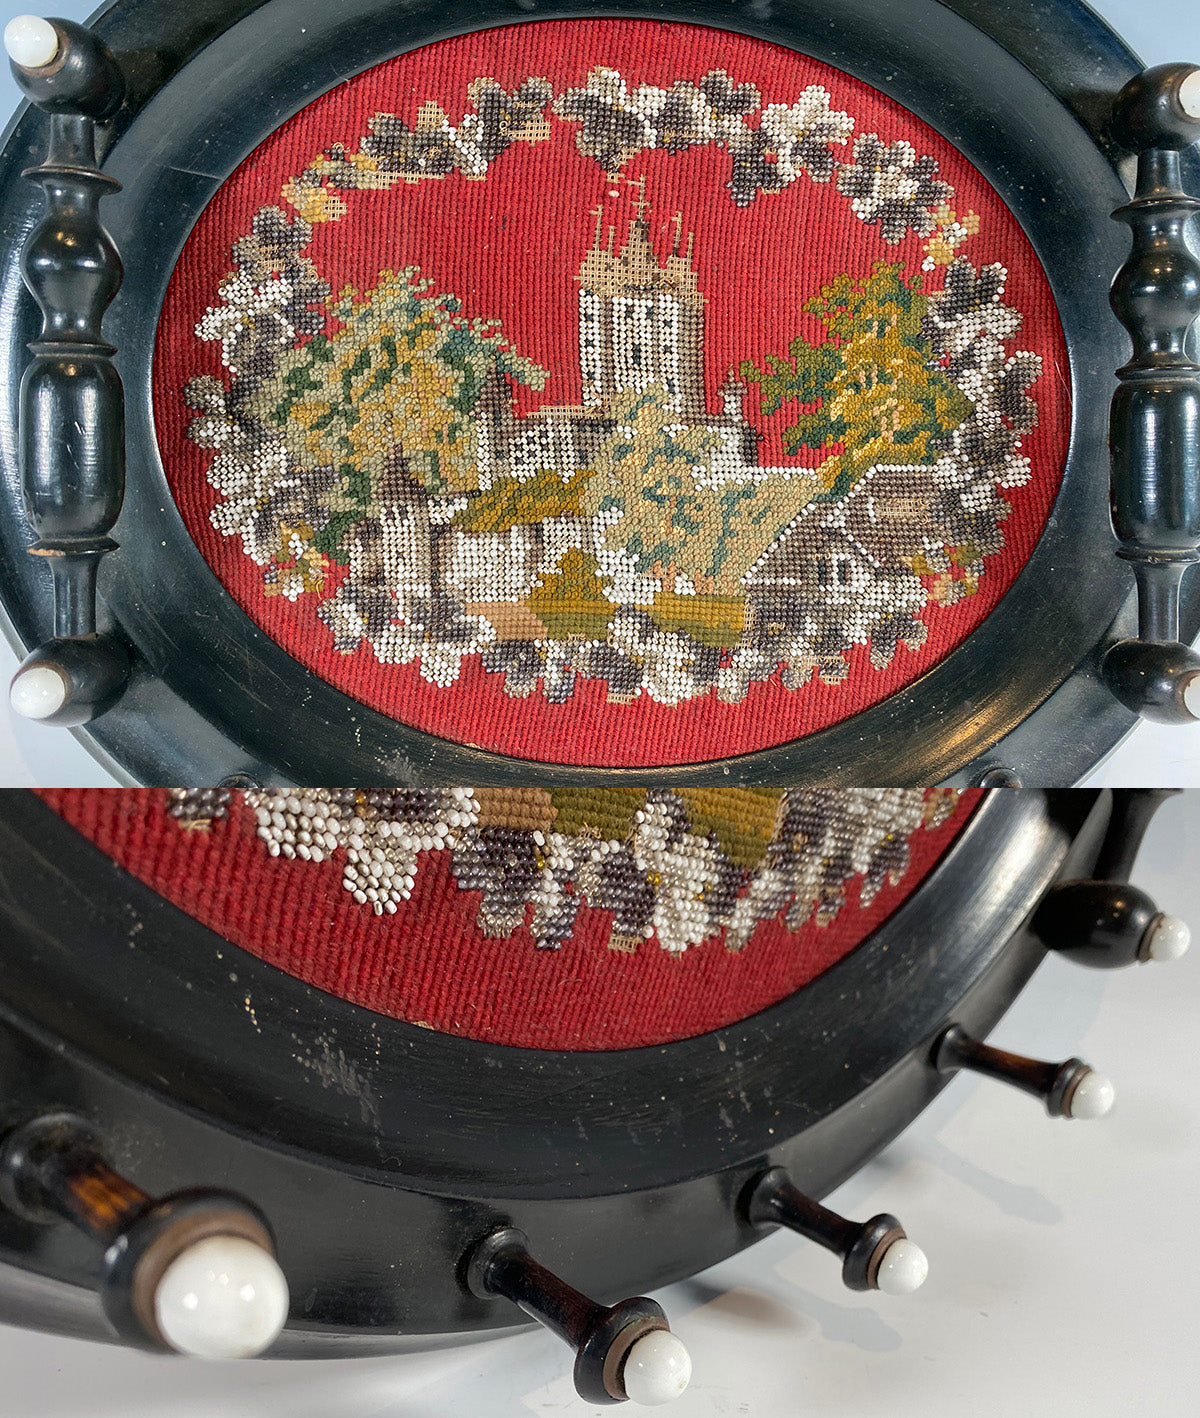 Antique Victorian Glass Beadwork and Needlepoint Castle in 15 3/4" Coat Rack Frame, c.1850s